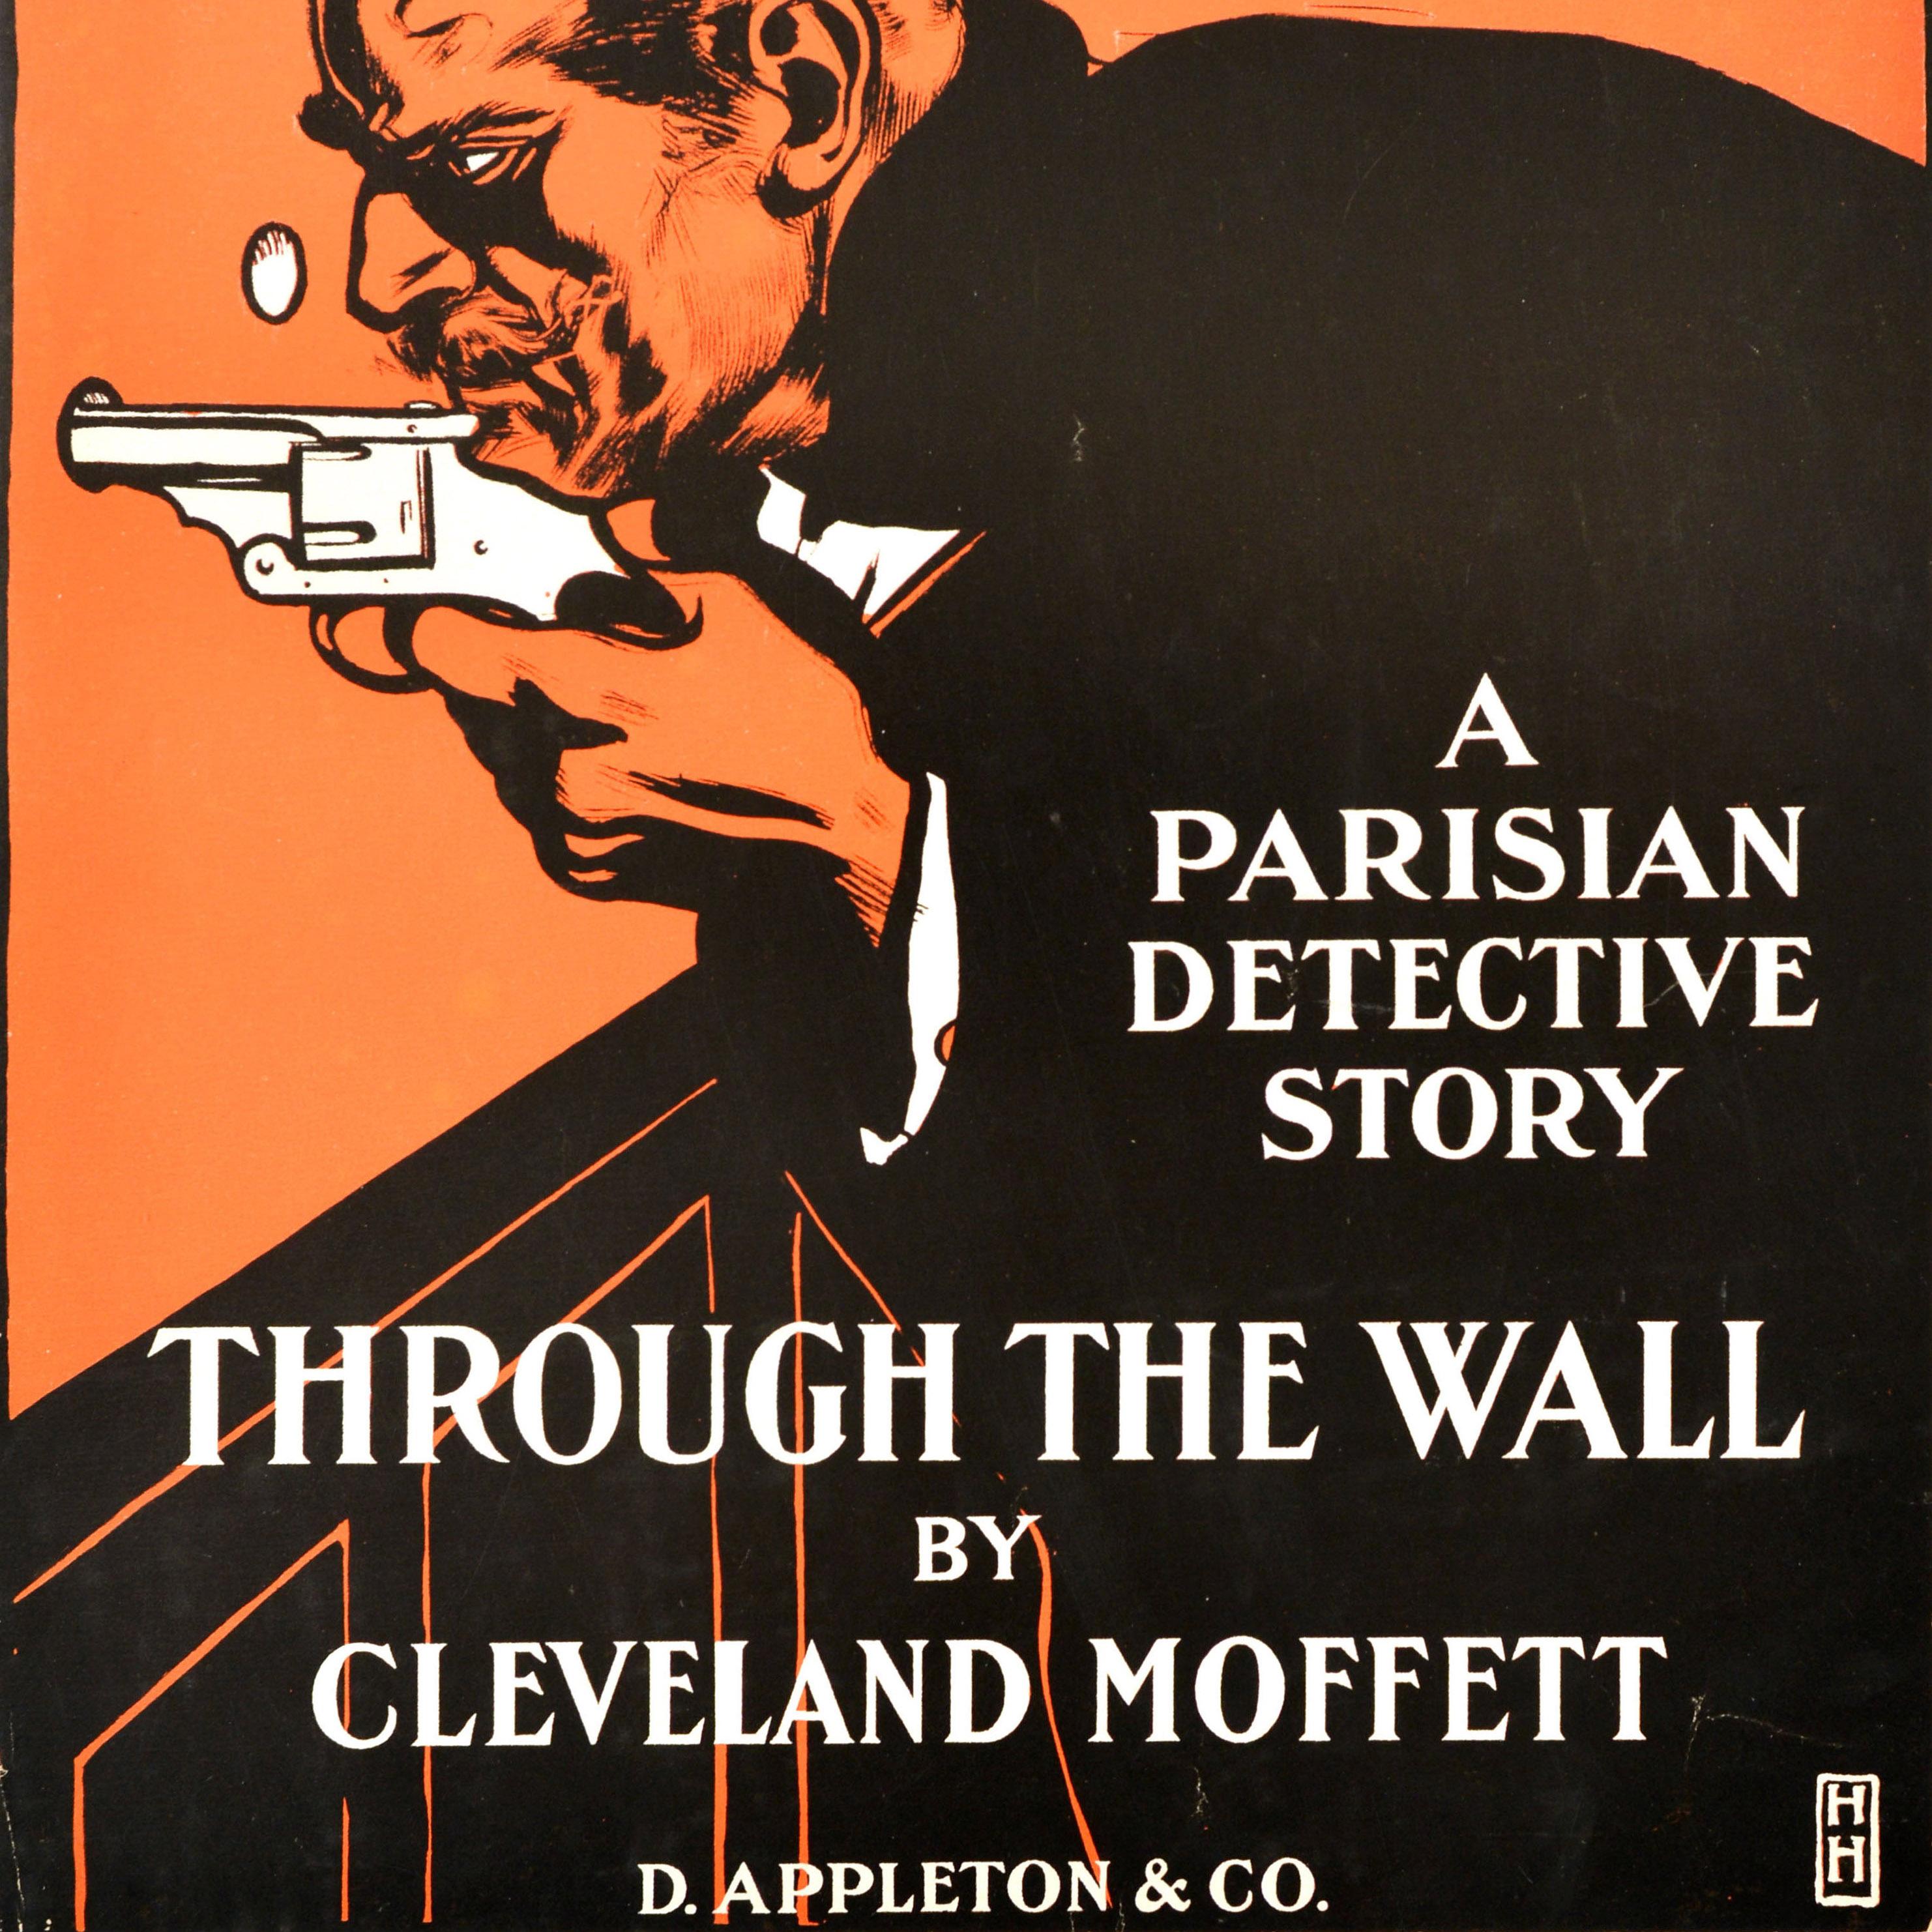 Original antique book advertising poster for a Parisian detective story Through the Wall by Cleveland Moffett published by D Appleton & Co featuring a great illustration of a moustached man holding a revolver gun through a hole in wall and peeping